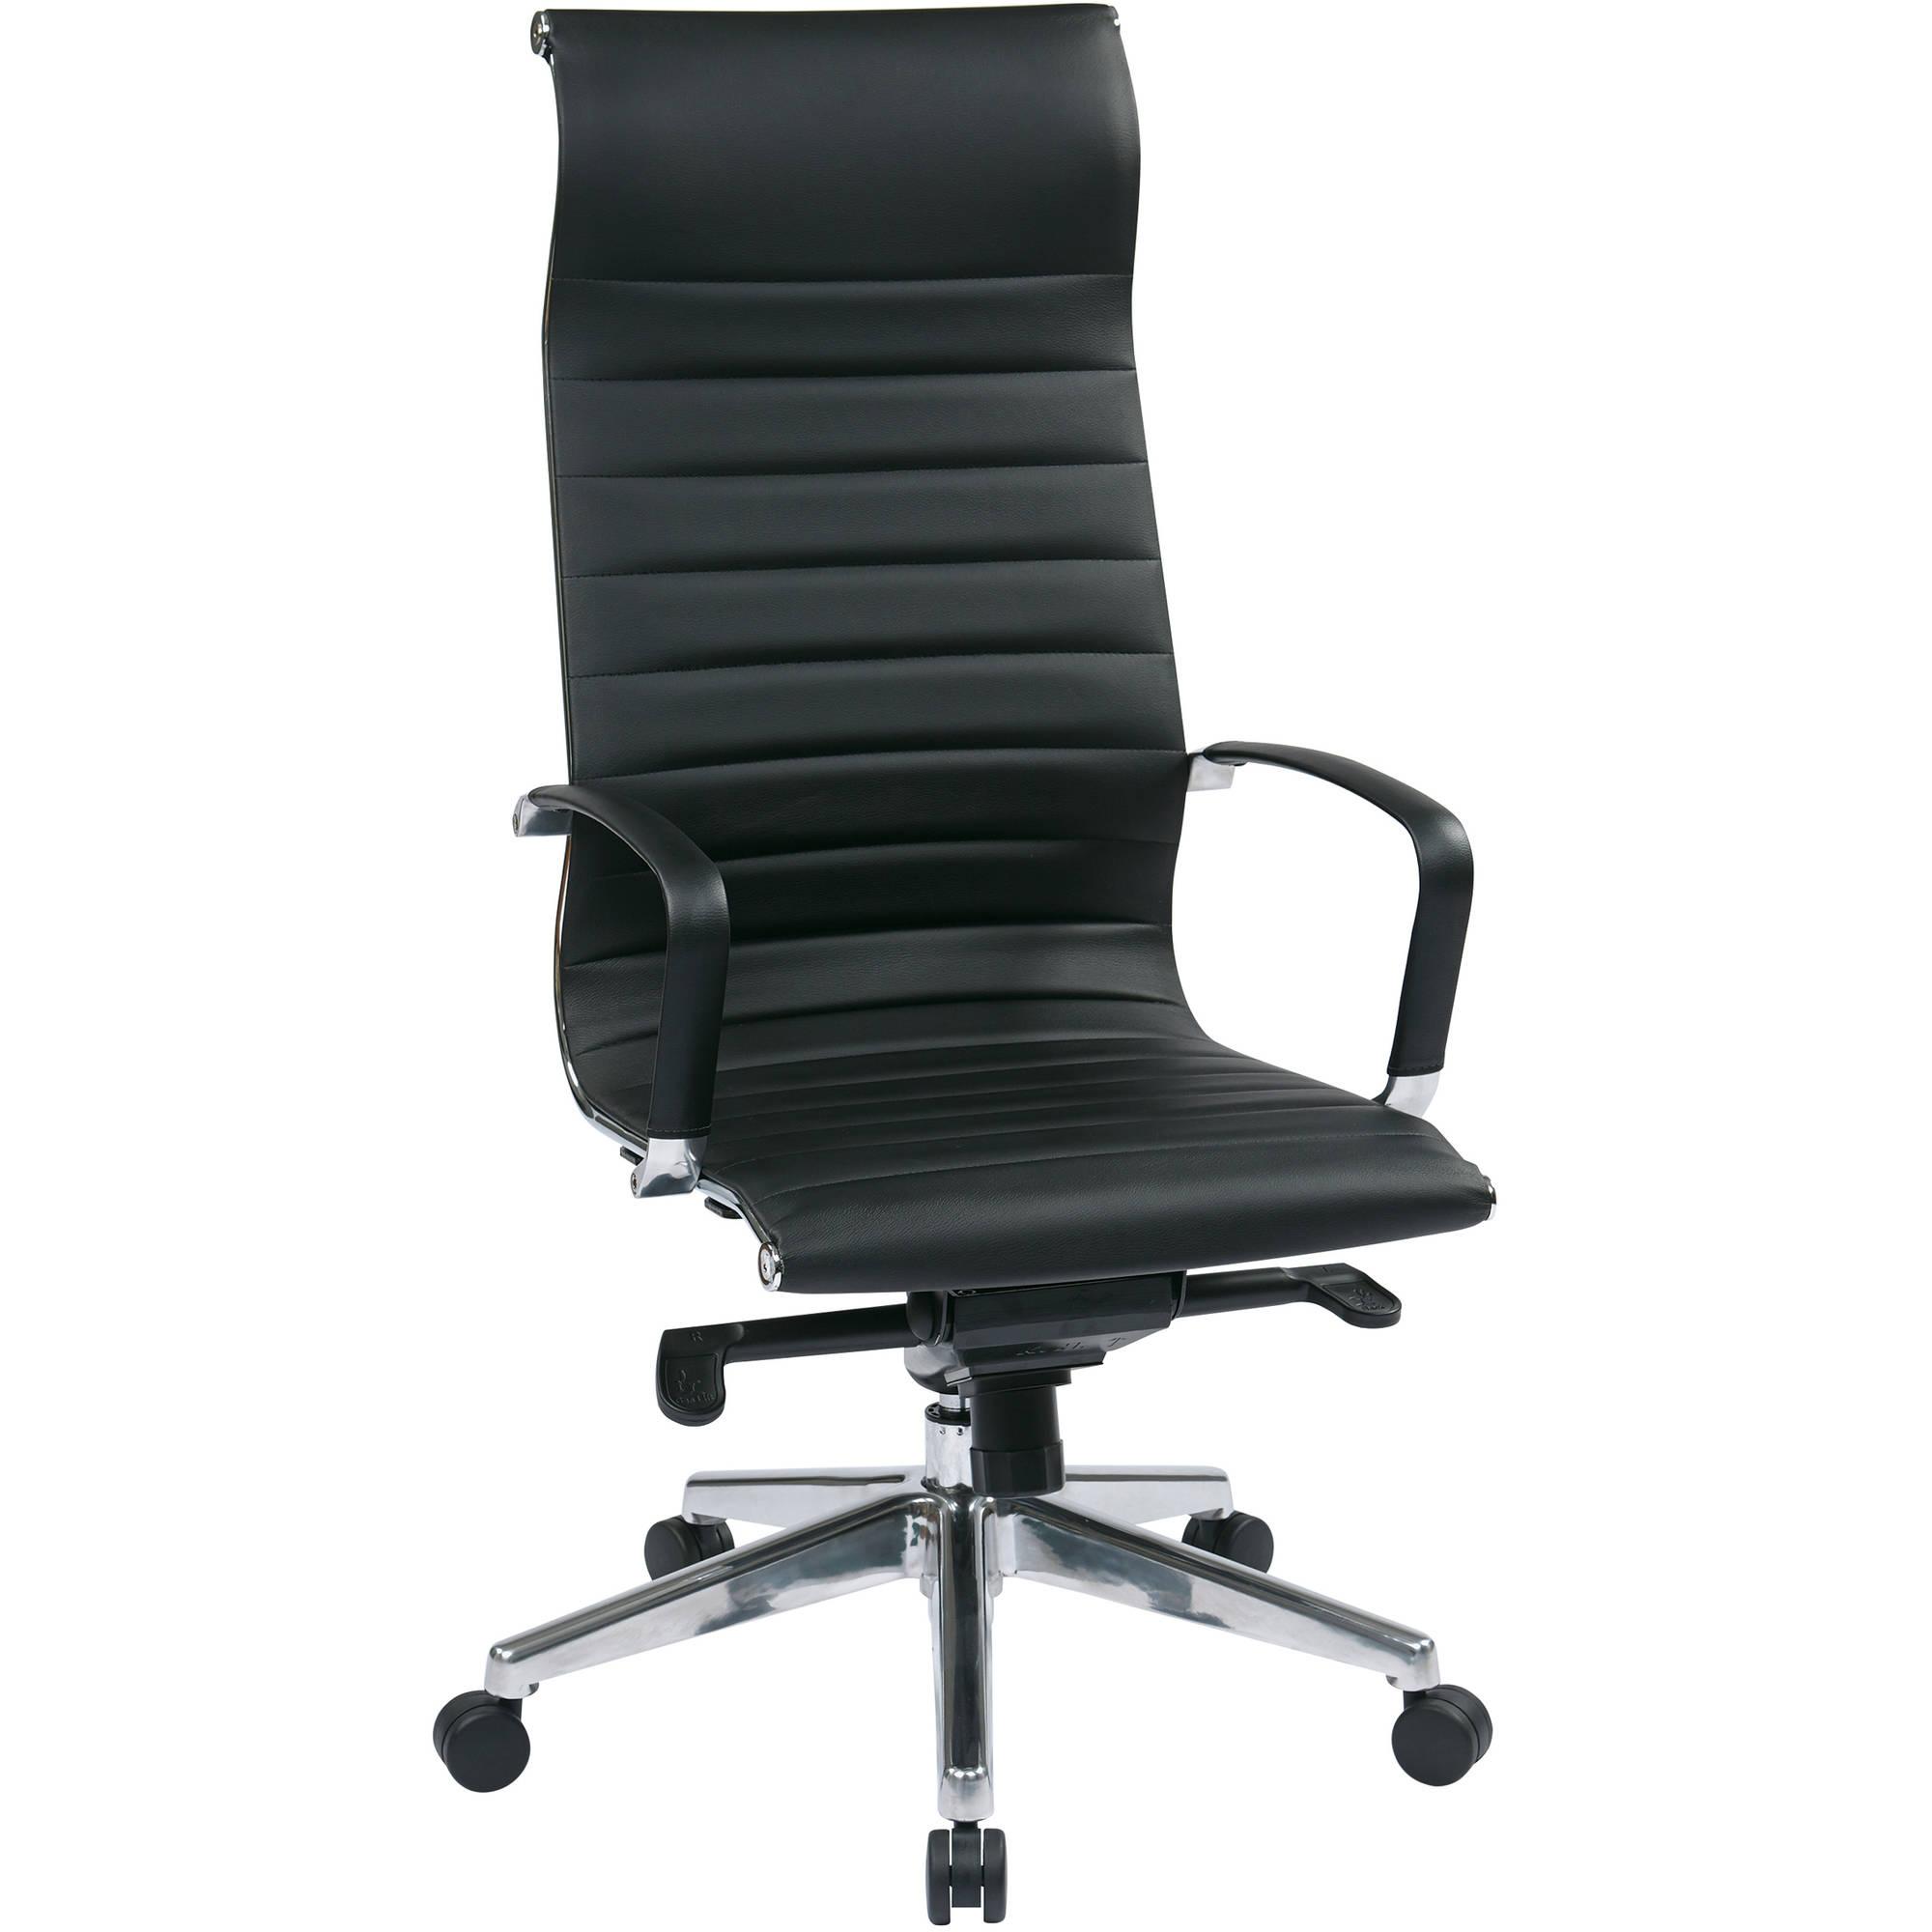 SO-73603 High Back Black Eco Leather Chair